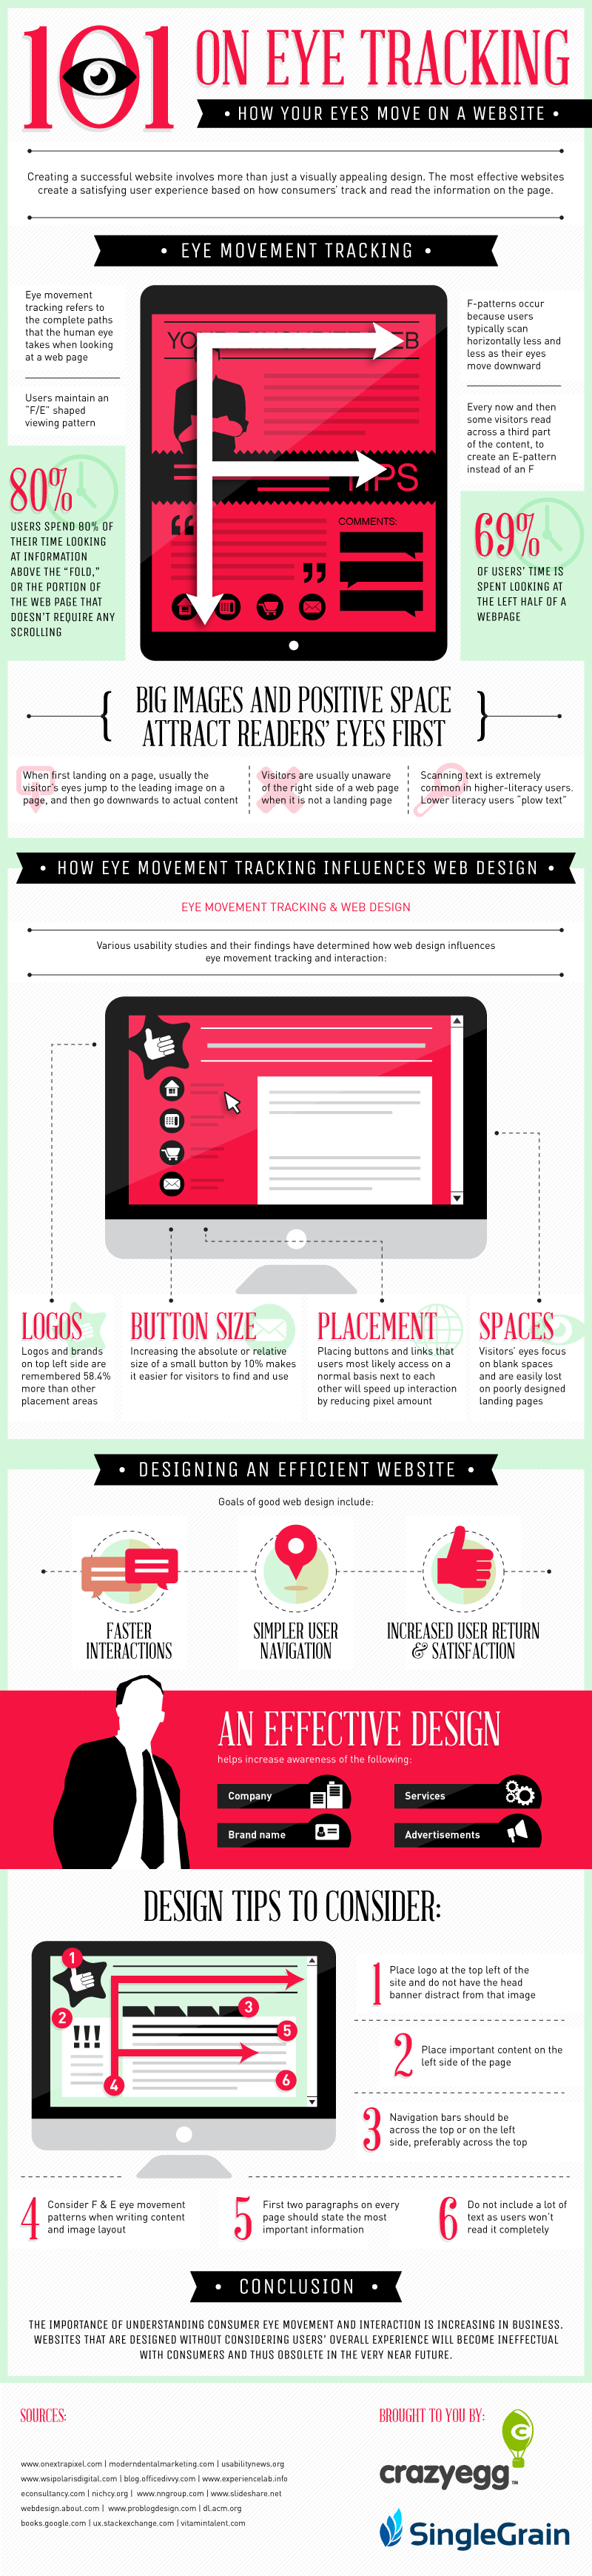 how-your-eyes-move-on-a-website-infographic-internet-marketing-with-blog-optimization